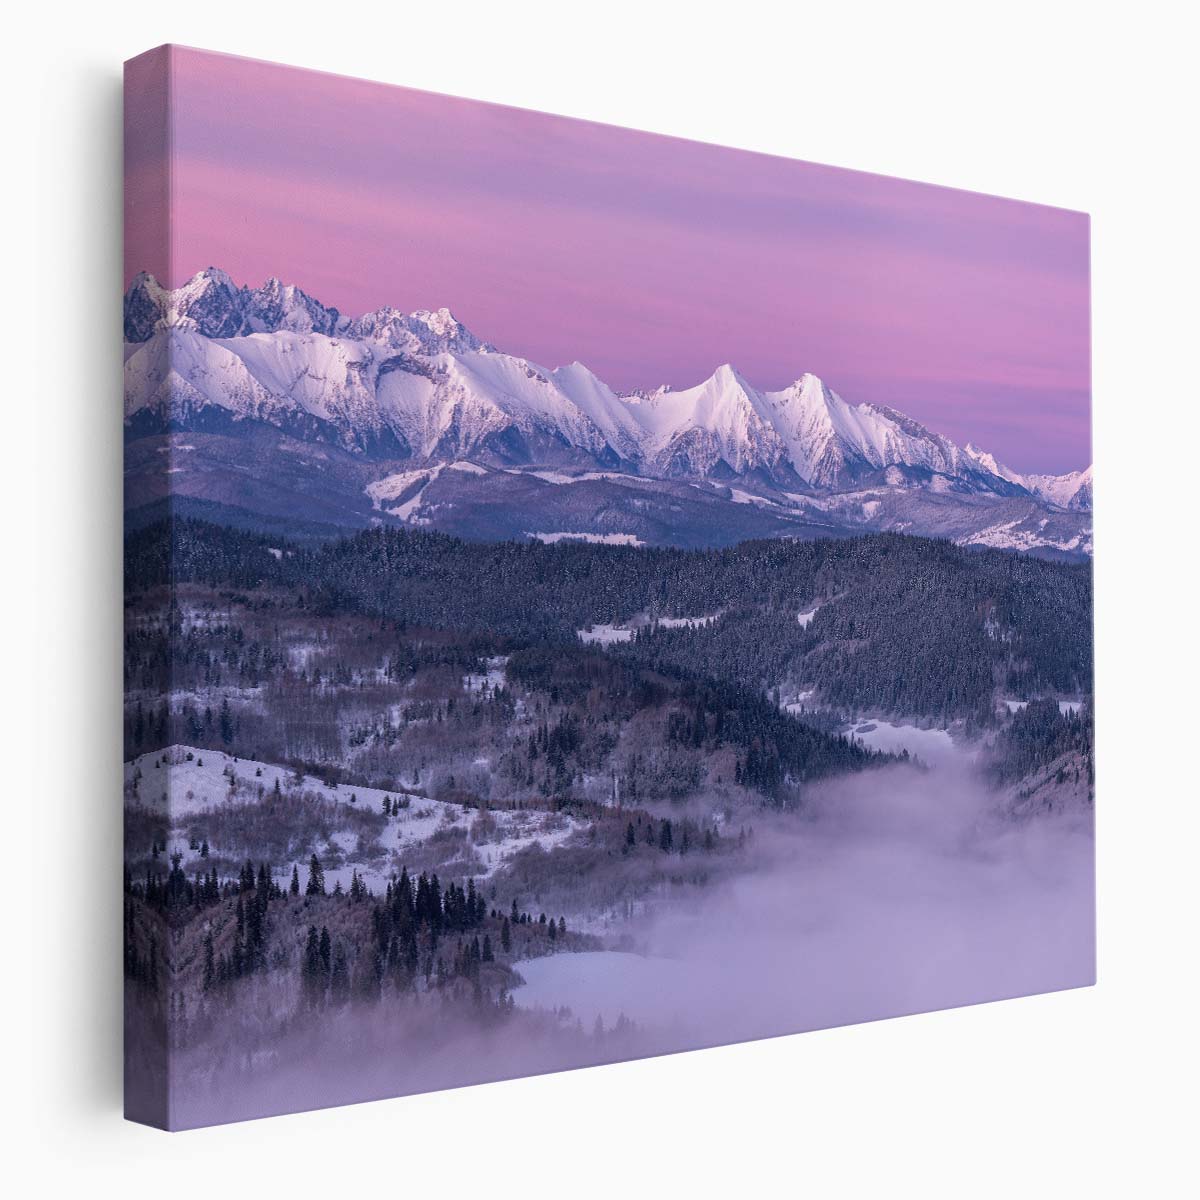 Misty Dawn in Snowy Tatra Mountains Panoramic Wall Art by Luxuriance Designs. Made in USA.